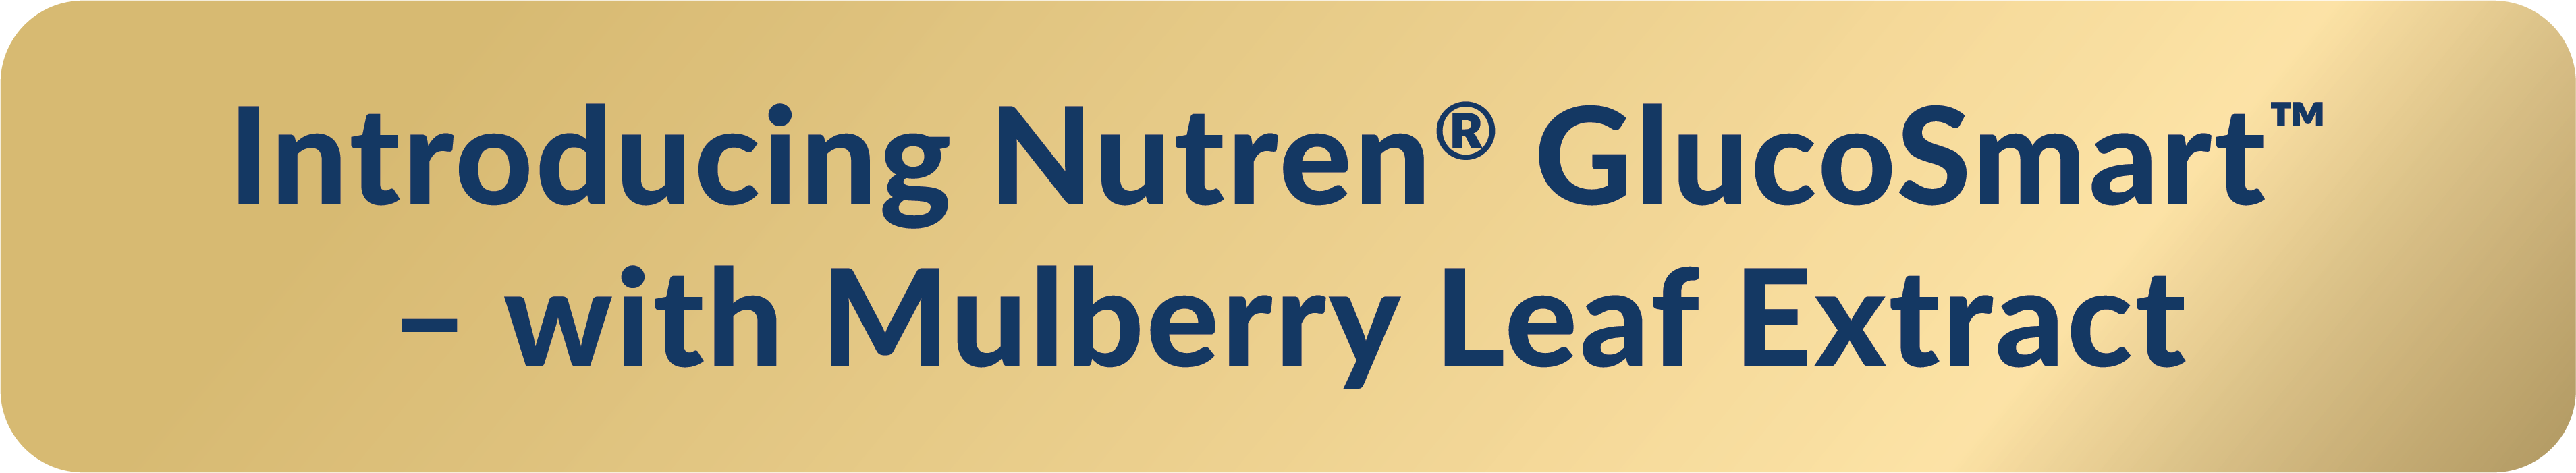 Introducing Nutren GlucoSmart - with Mulberry Leaf Extract